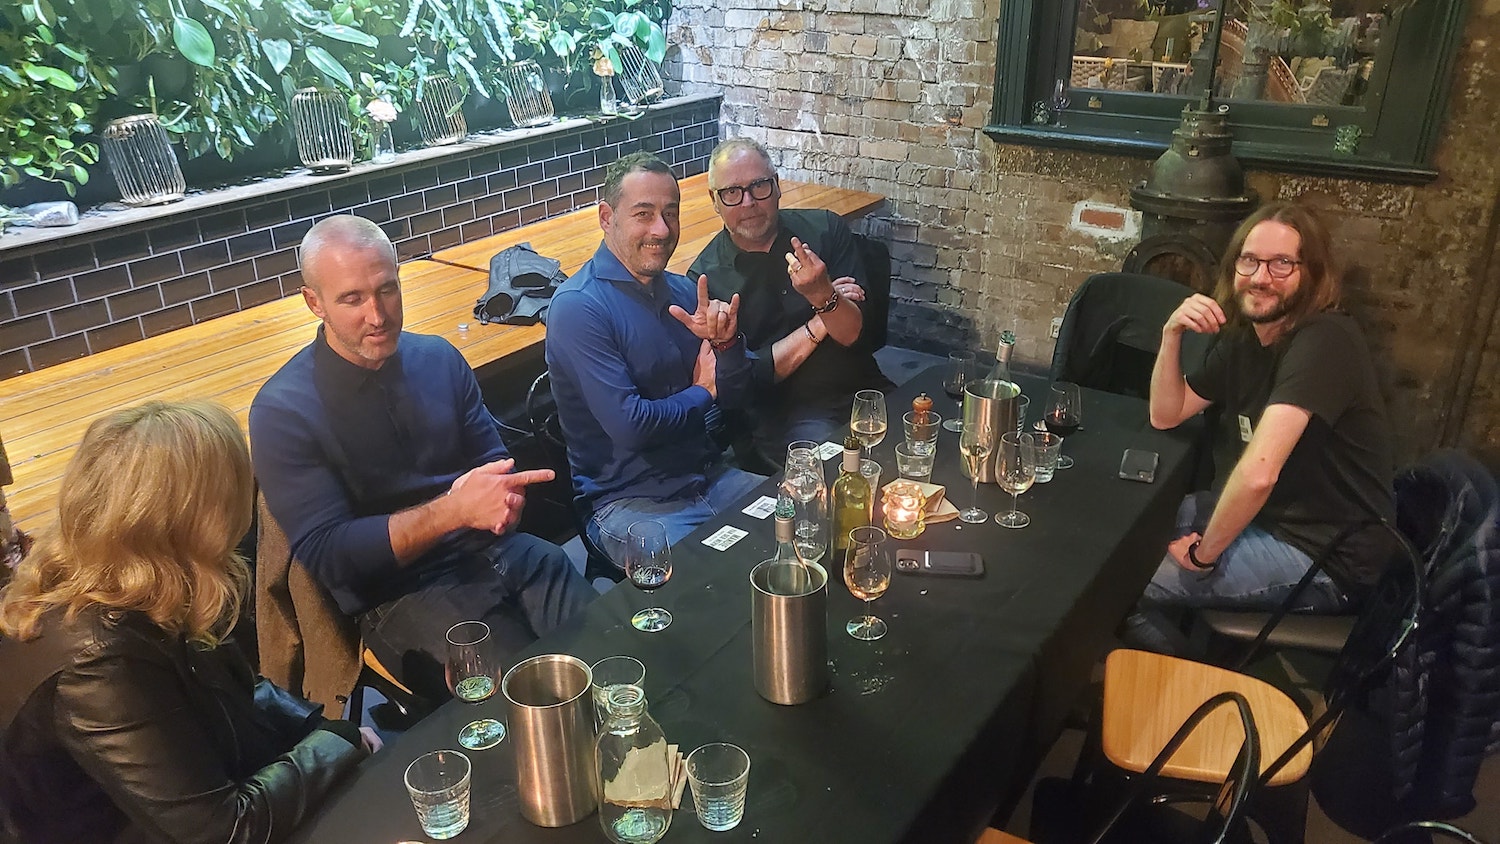 Sydney’s Top creative chiefs attend an exclusive CCO dinner with The One Club CEO Kevin Swanepoel and Chief Growth Officer Molly Crossin